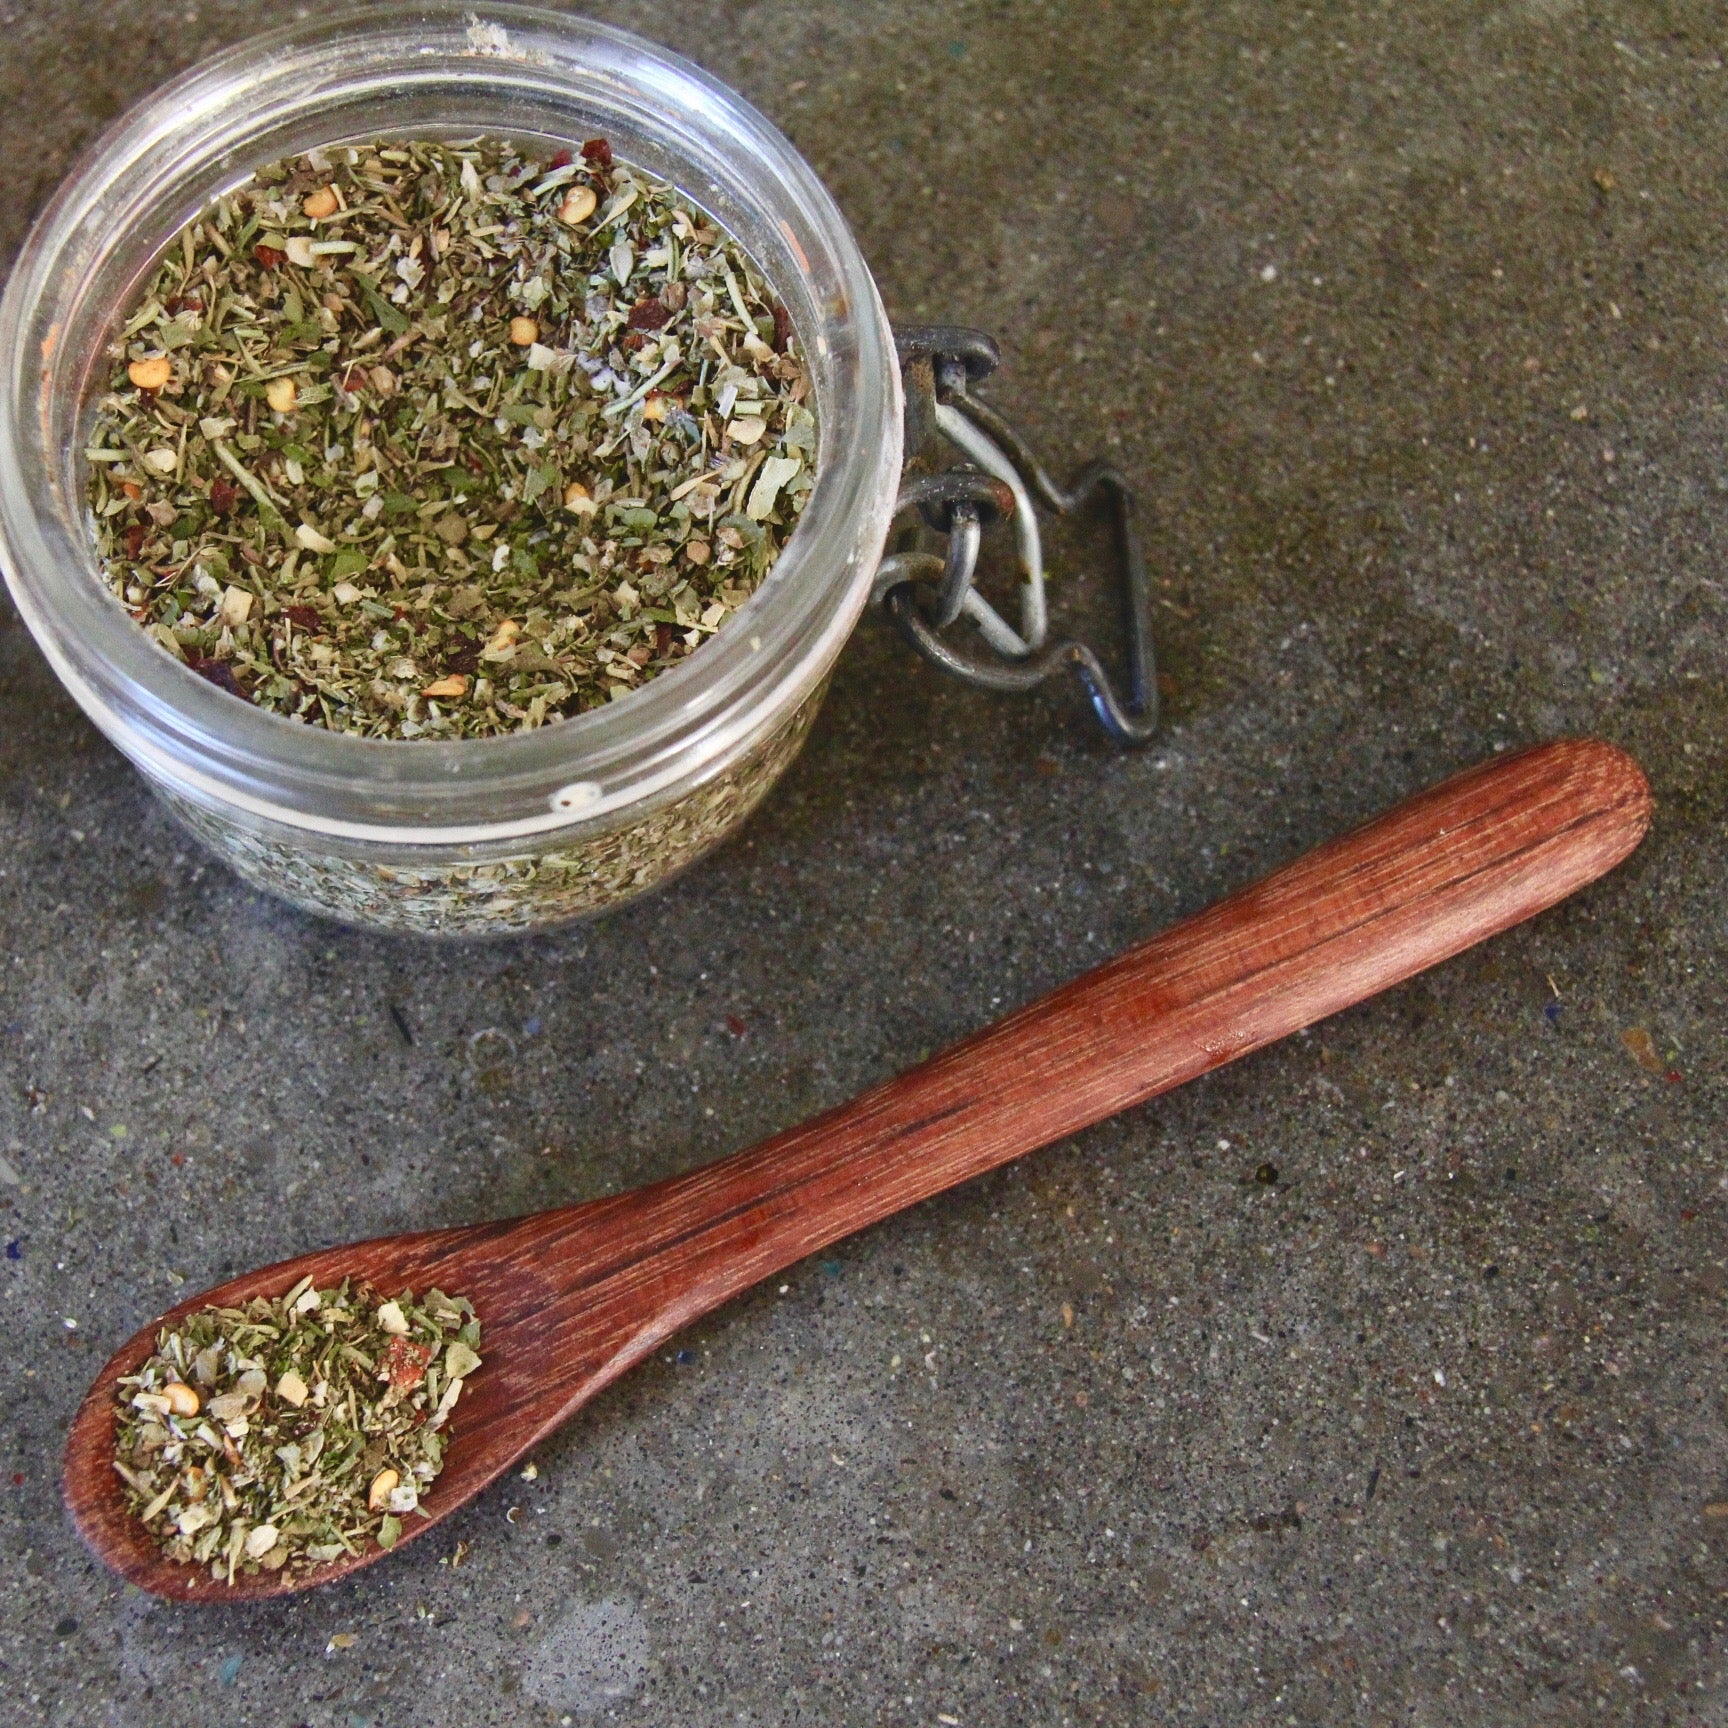 Camp Director&#39;s Handcrafted Herb + Spice Blend and small wooden spoon